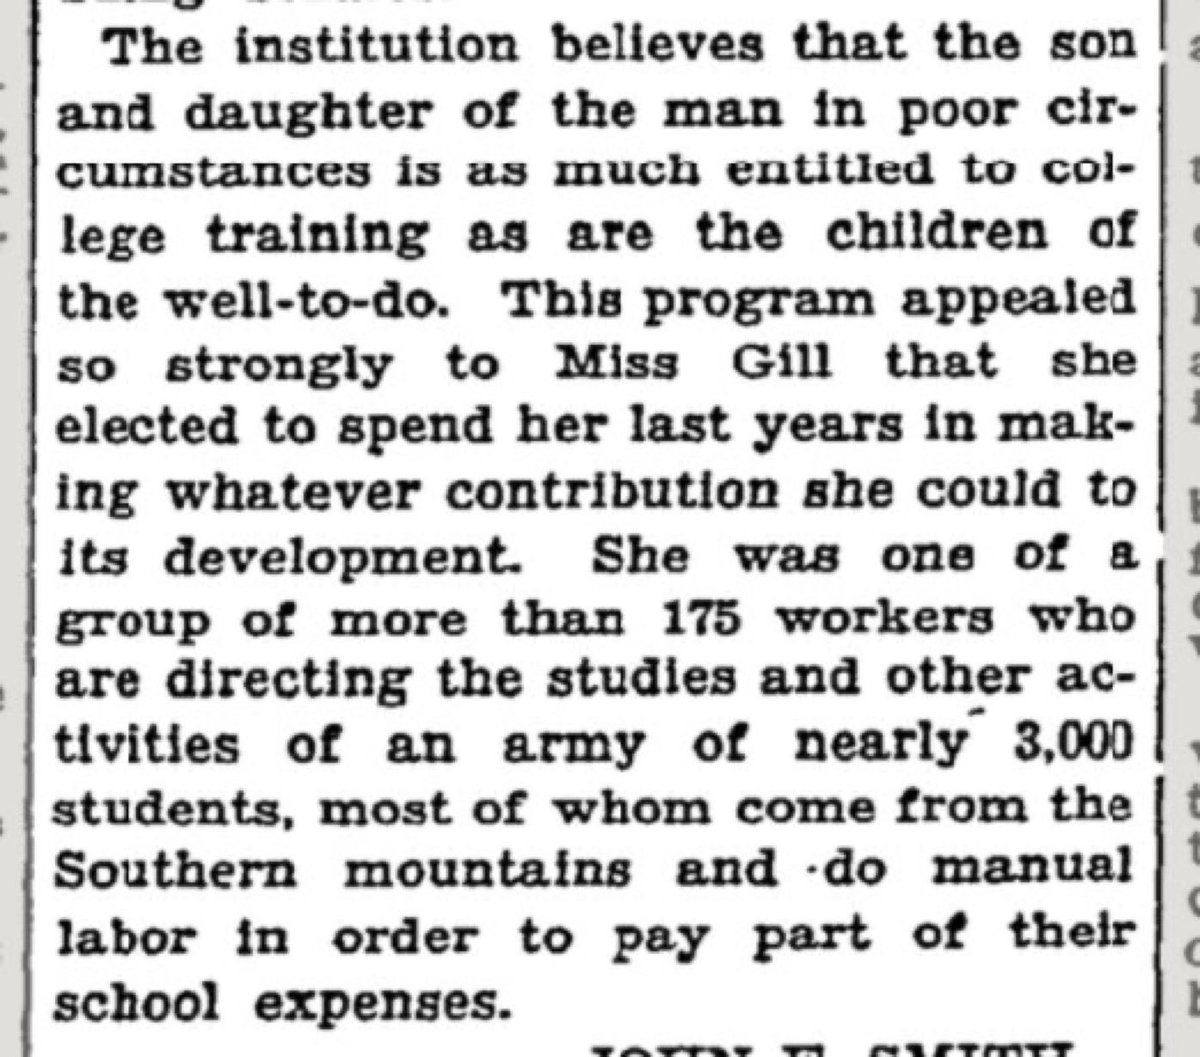 (Gill's hierarchy of home and faculty duties is in sharp contrast to her otherwise progressive views about education. She ended her career at Berea College in Kentucky as an advocate for co-ed students in an especially poor part of Appalachia.) https://timesmachine.nytimes.com/timesmachine/1926/02/09/119061022.html?action=click&contentCollection=Archives&module=ArticleEndCTA&region=ArchiveBody&pgtype=article&pageNumber=24